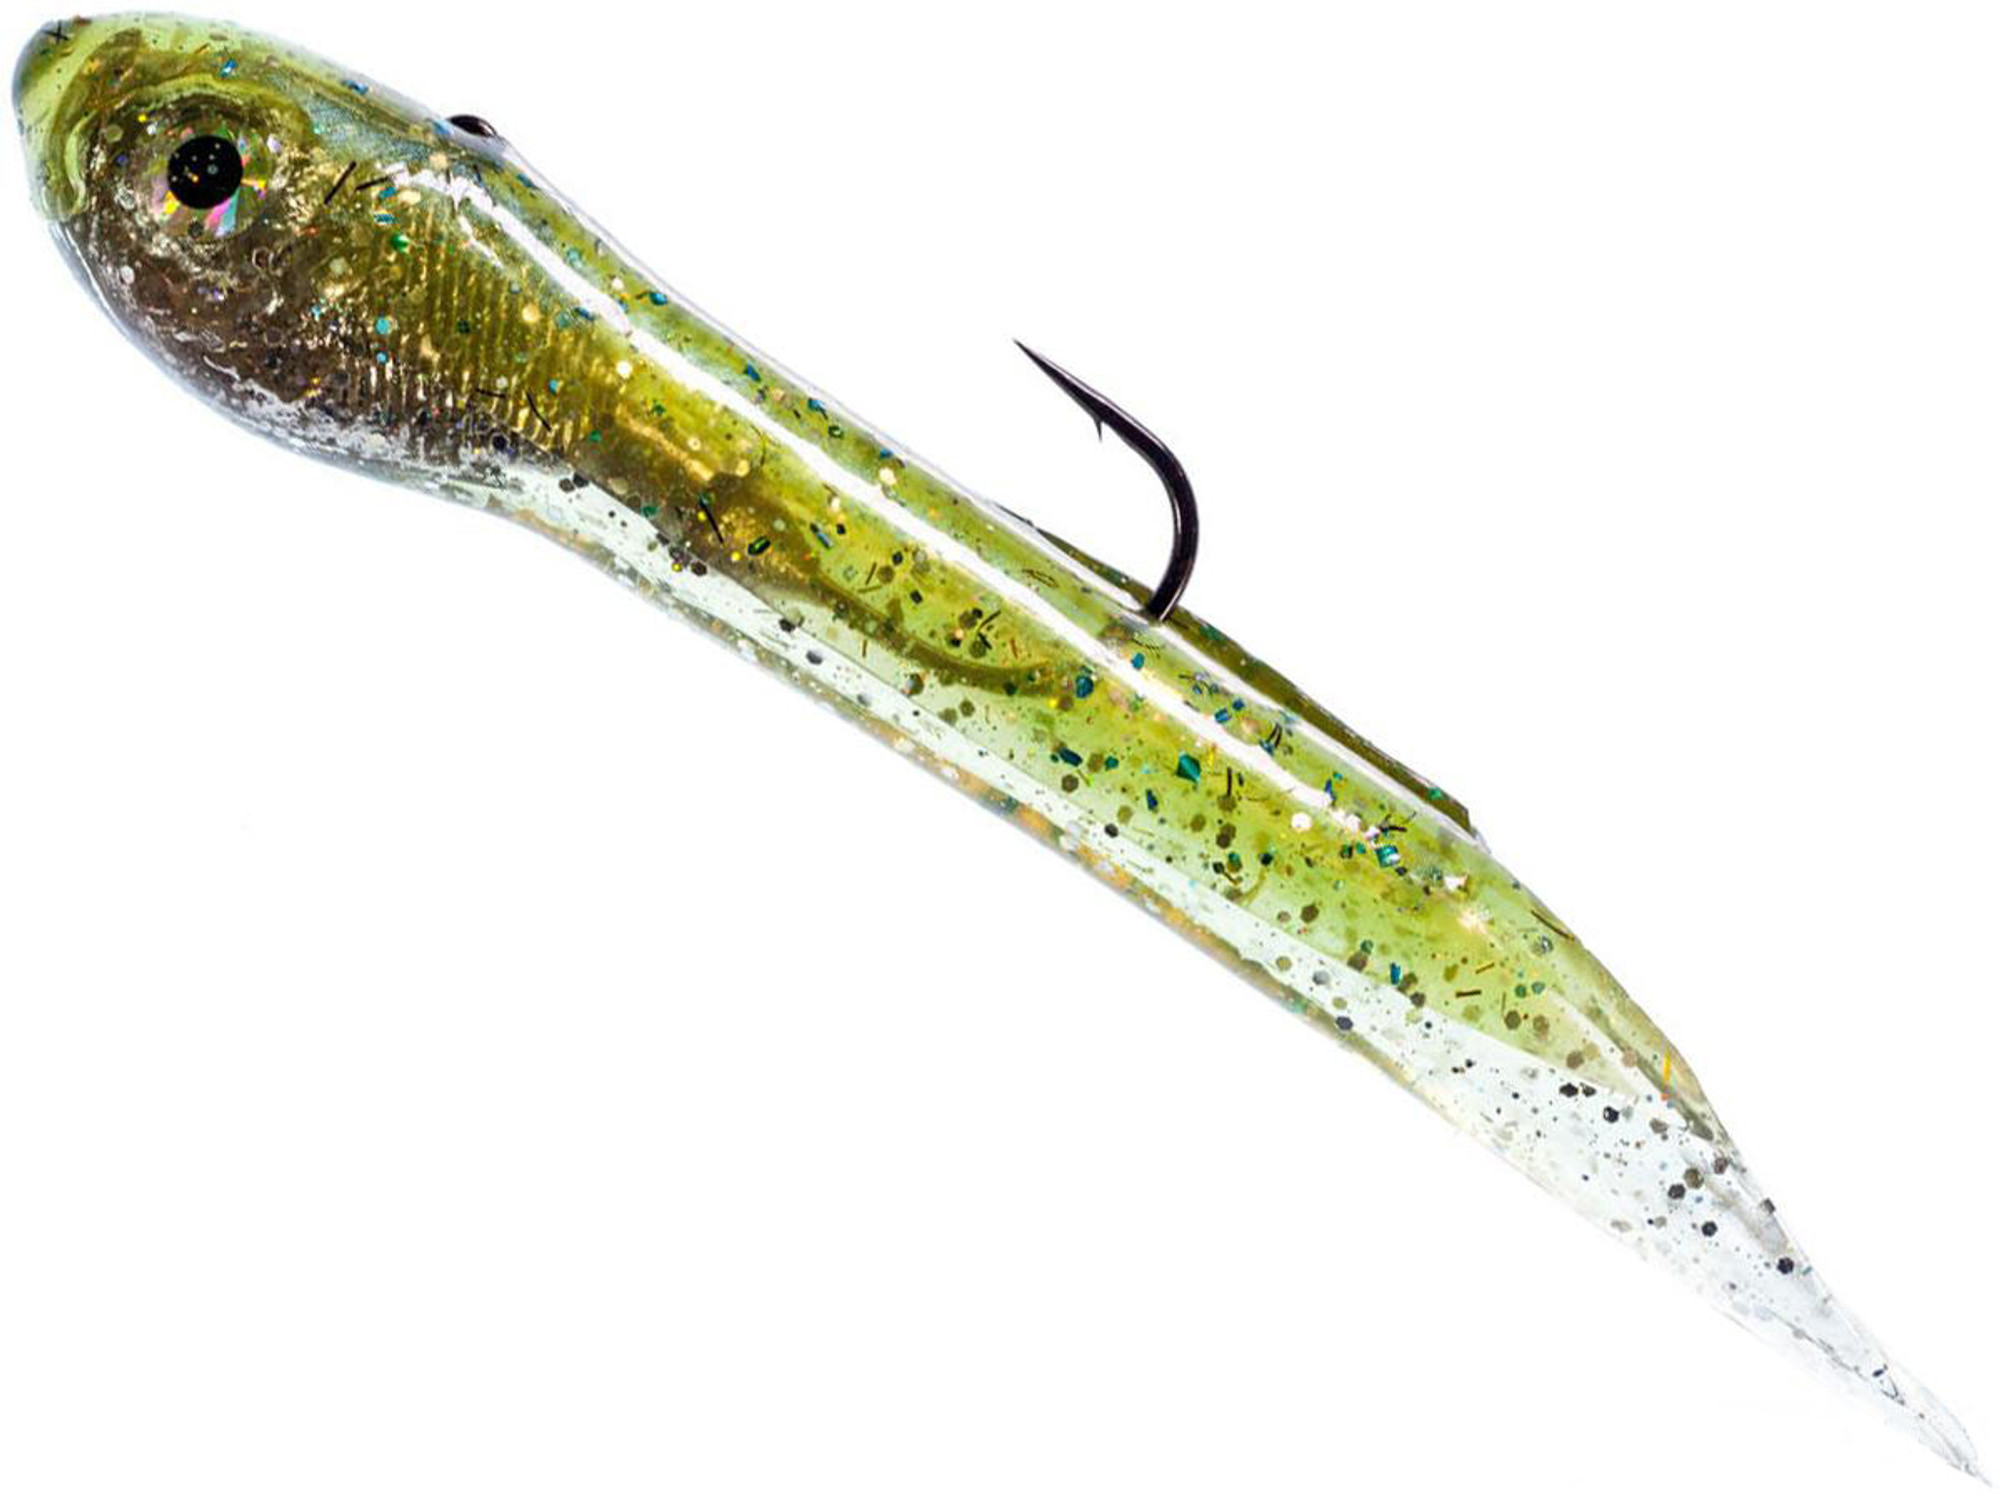 Hook Up Baits Handcrafted Soft Fishing Jigs (Color: Sardine Green Silver / 8" / 4 oz)